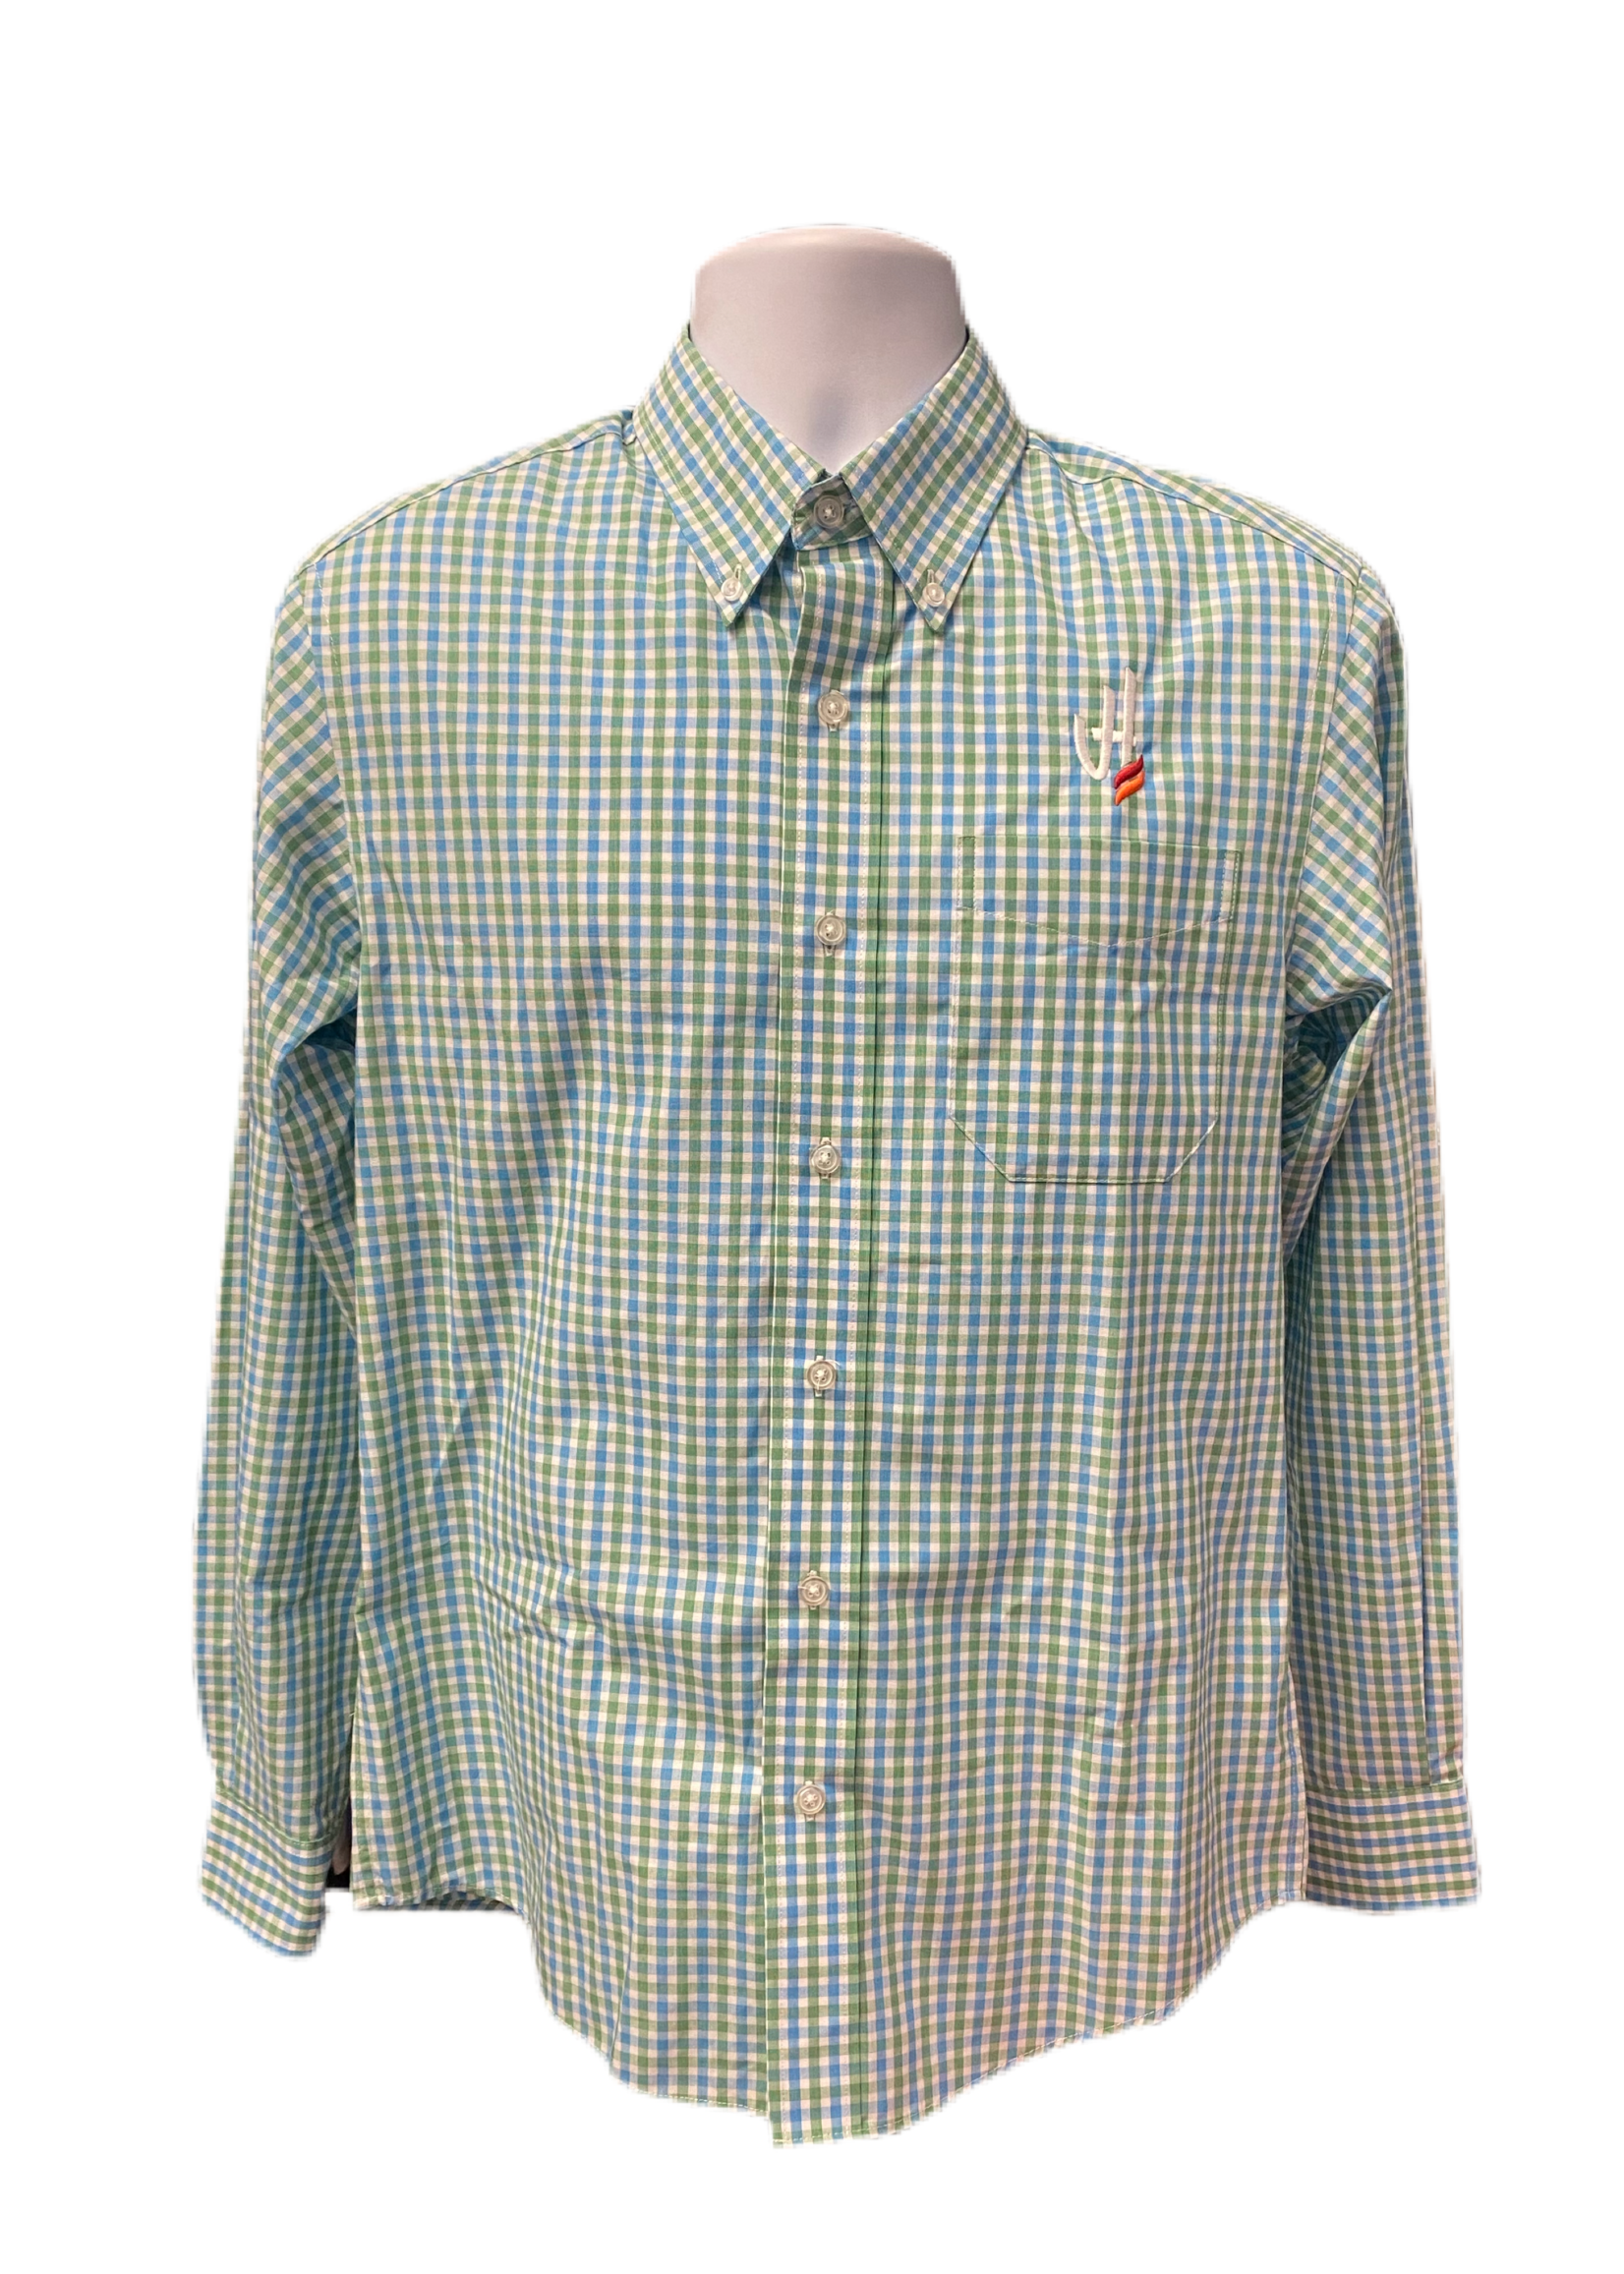 PA Gingham Easy Care Shirt